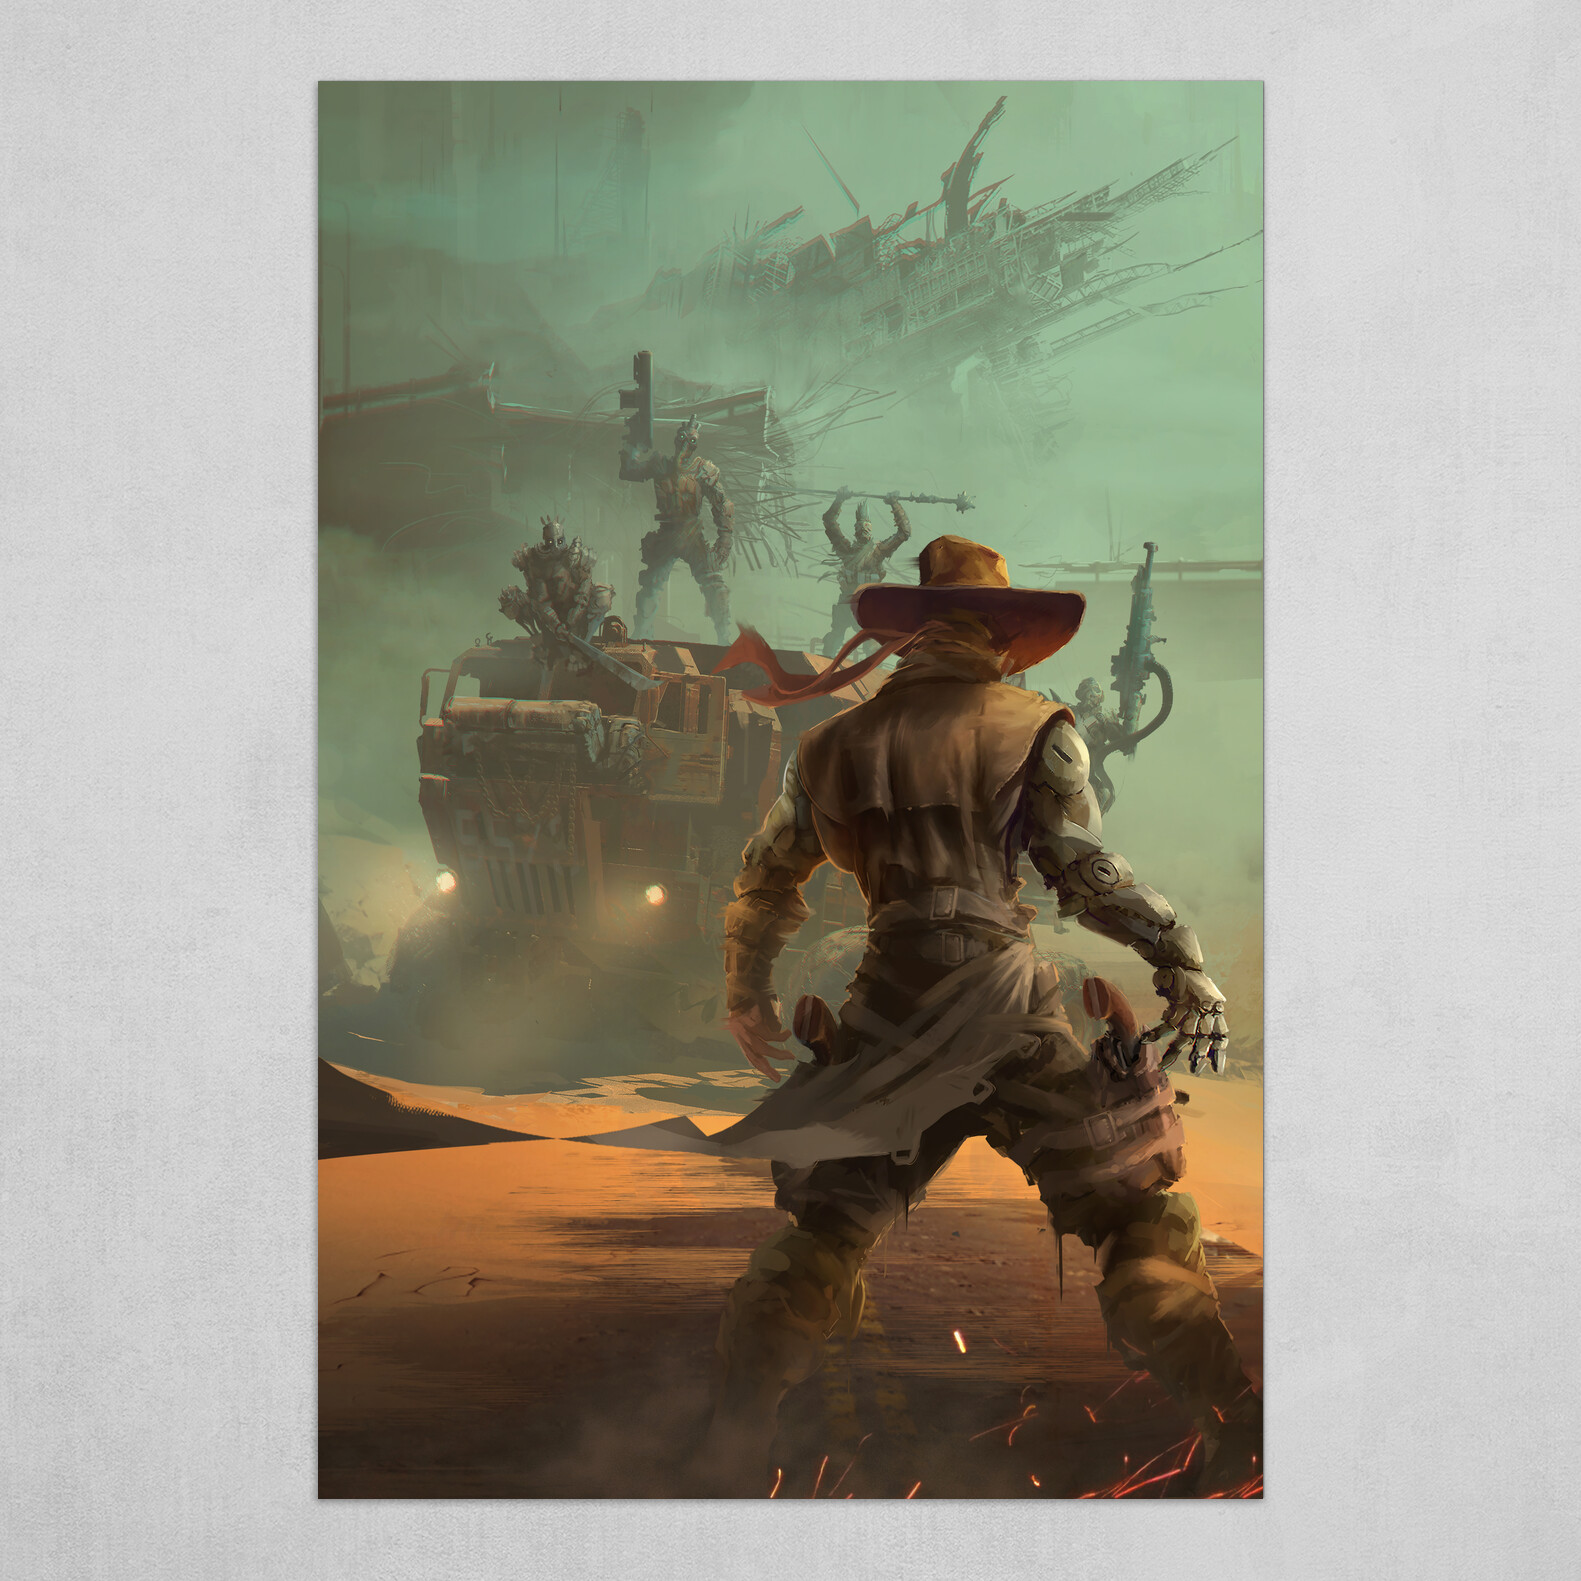 The Sheriff 3: A post-apocalyptic sci-fi western